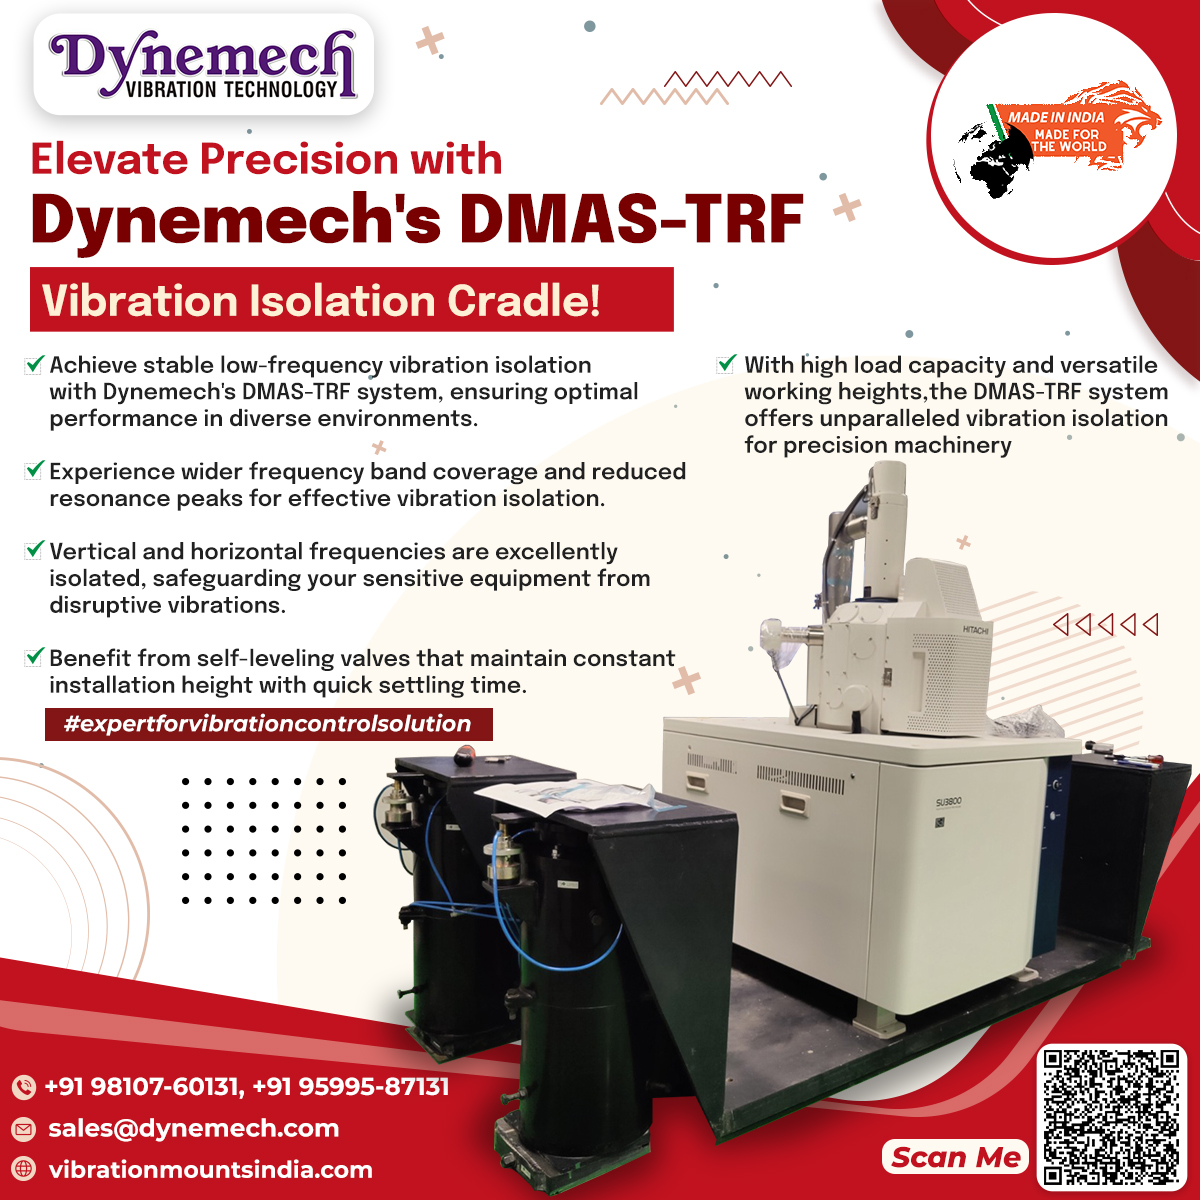 Dynemech DMAS-TRF Series - Anti-Vibration Cradle equipped with Vibration Isolation Pneumatic Air Triflex System.
#Dynemech,#DMAS-TRF,#AntiVibration,#VibrationIsolation,#PneumaticAirTriflex, #ManufacturingIndustry,#VibrationControl,#